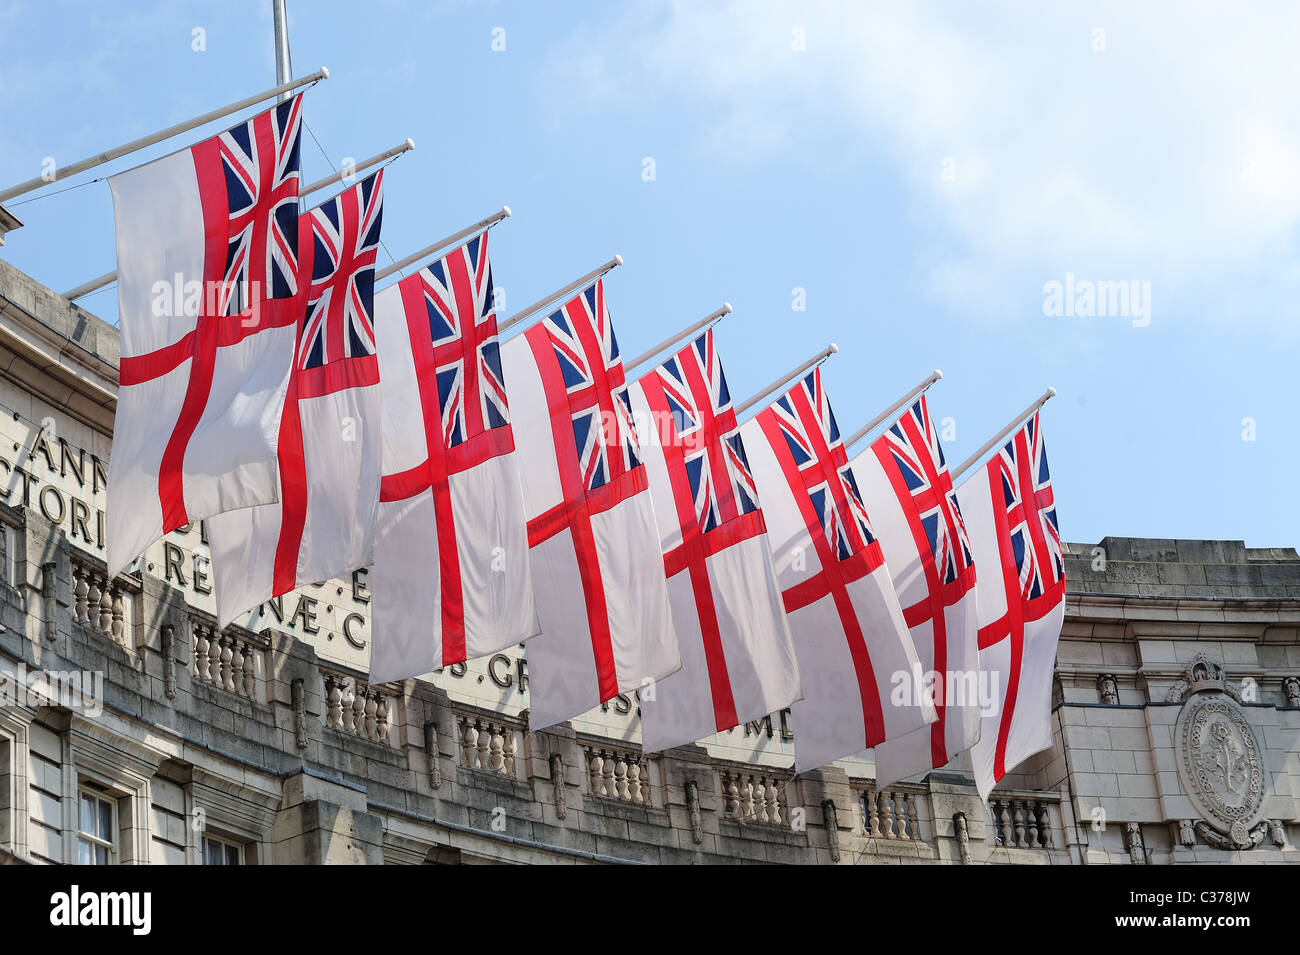 A view looking up at a row of white ensign flags flying over Admiralty Arch in London Stock Photo